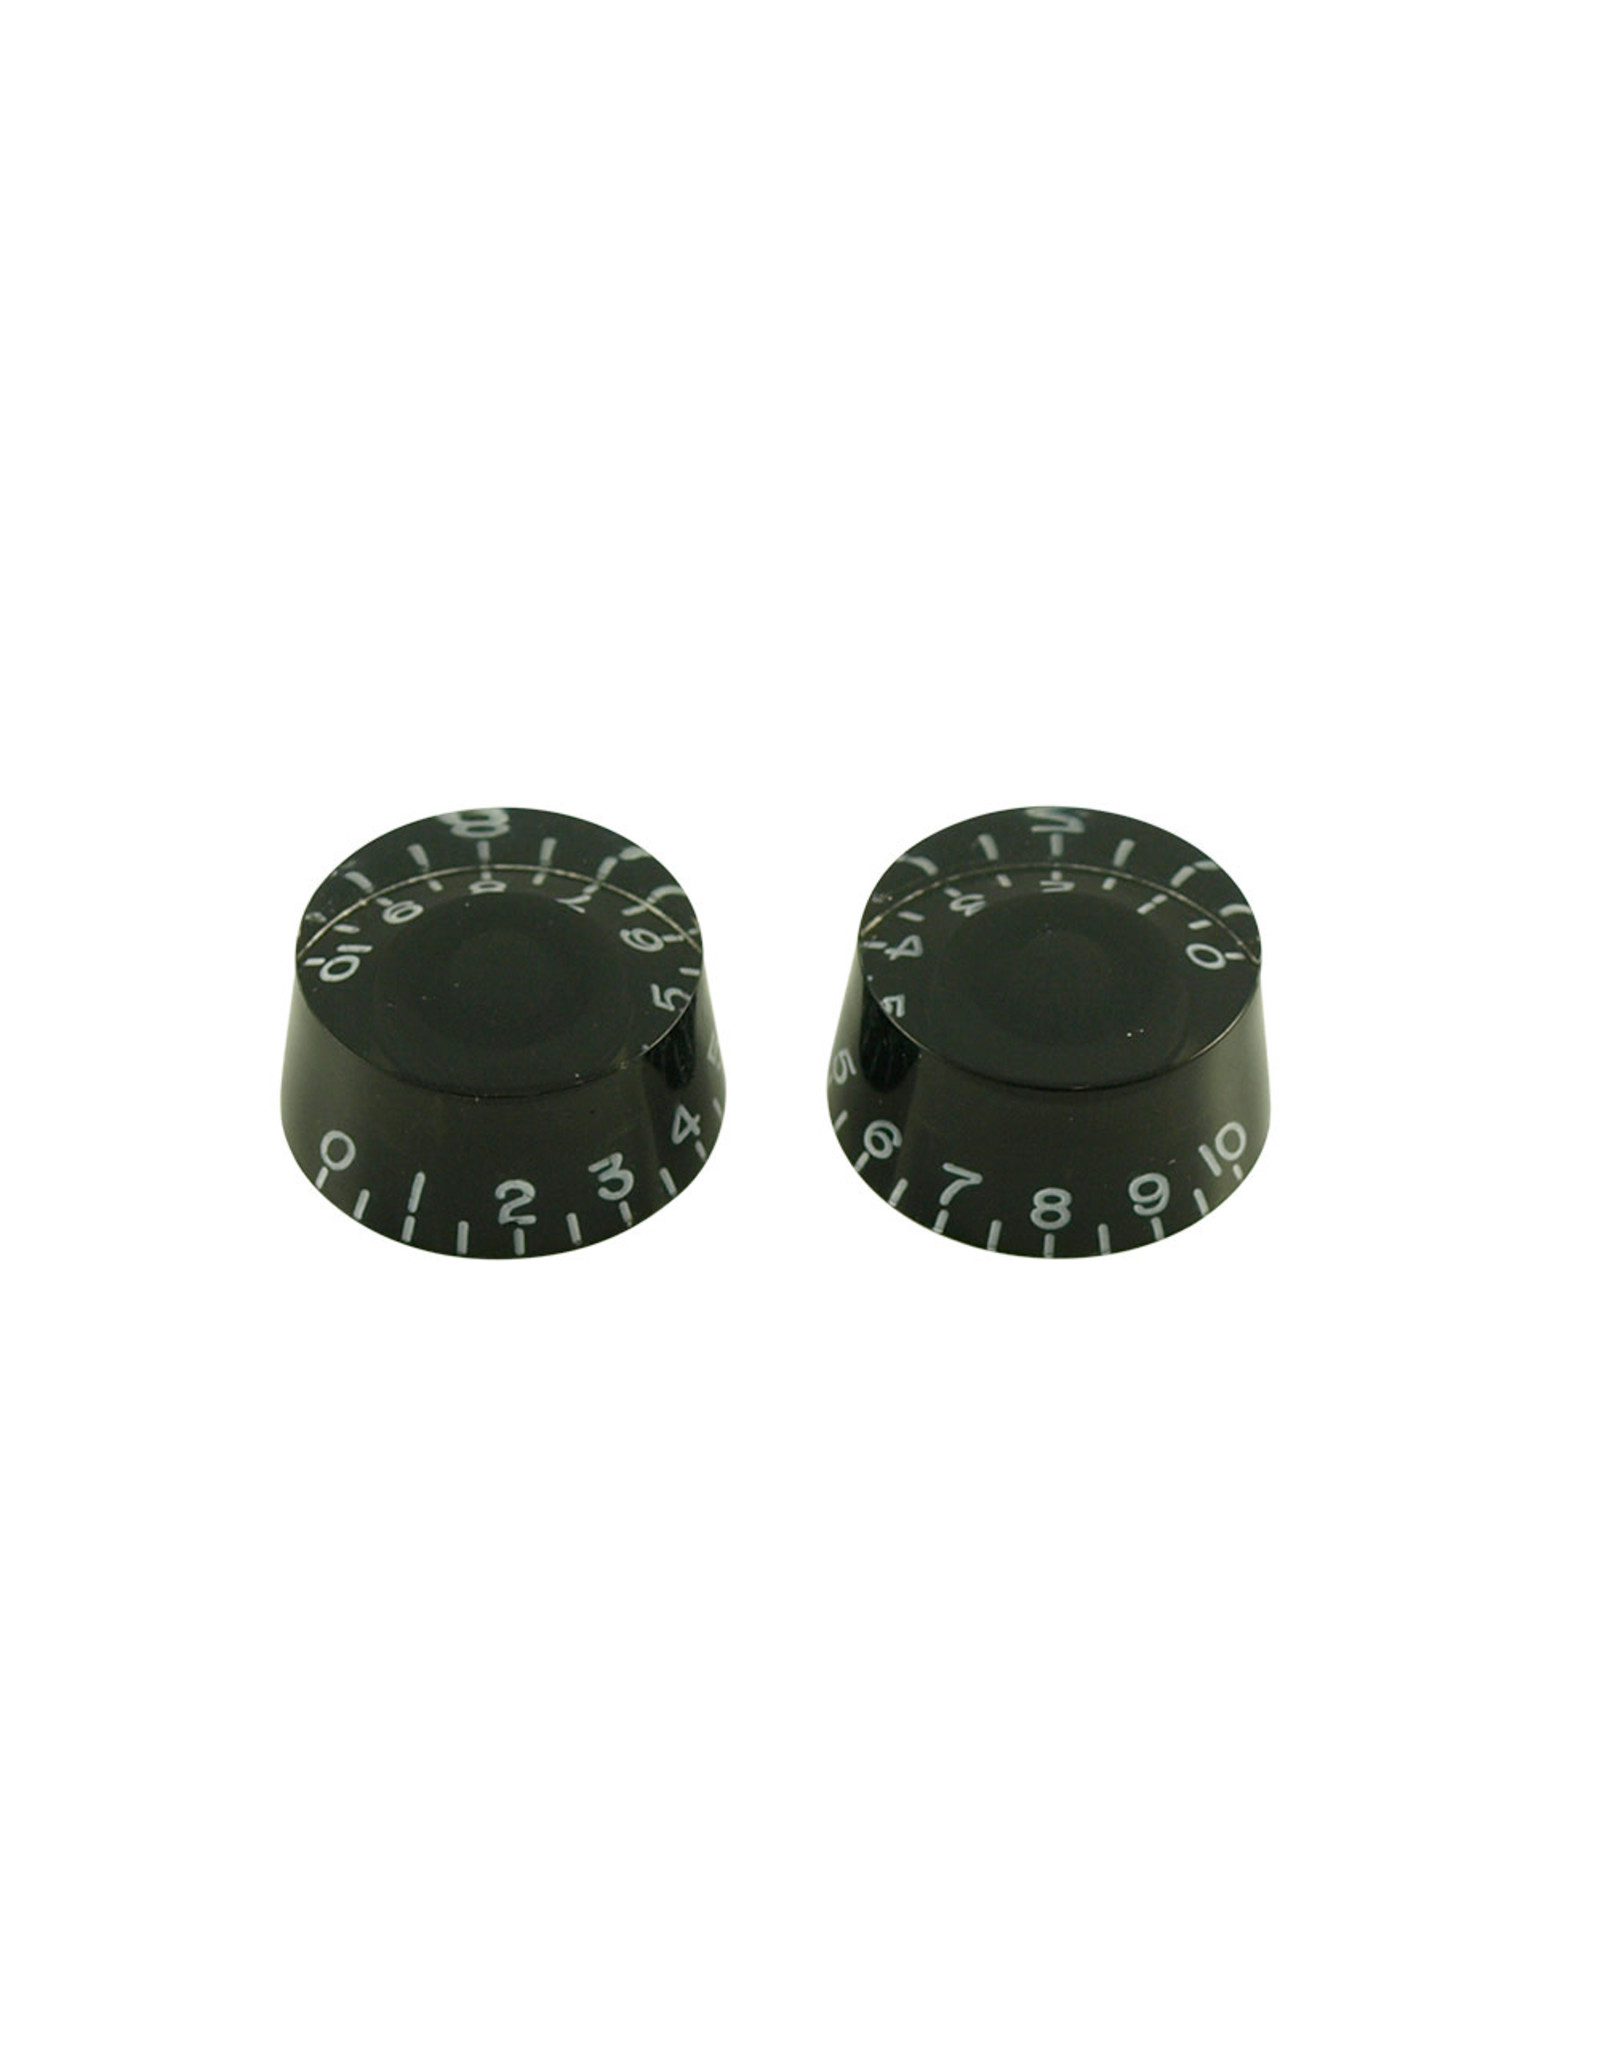 WD Music Products WD® Speed Knob Set Of 2 Black